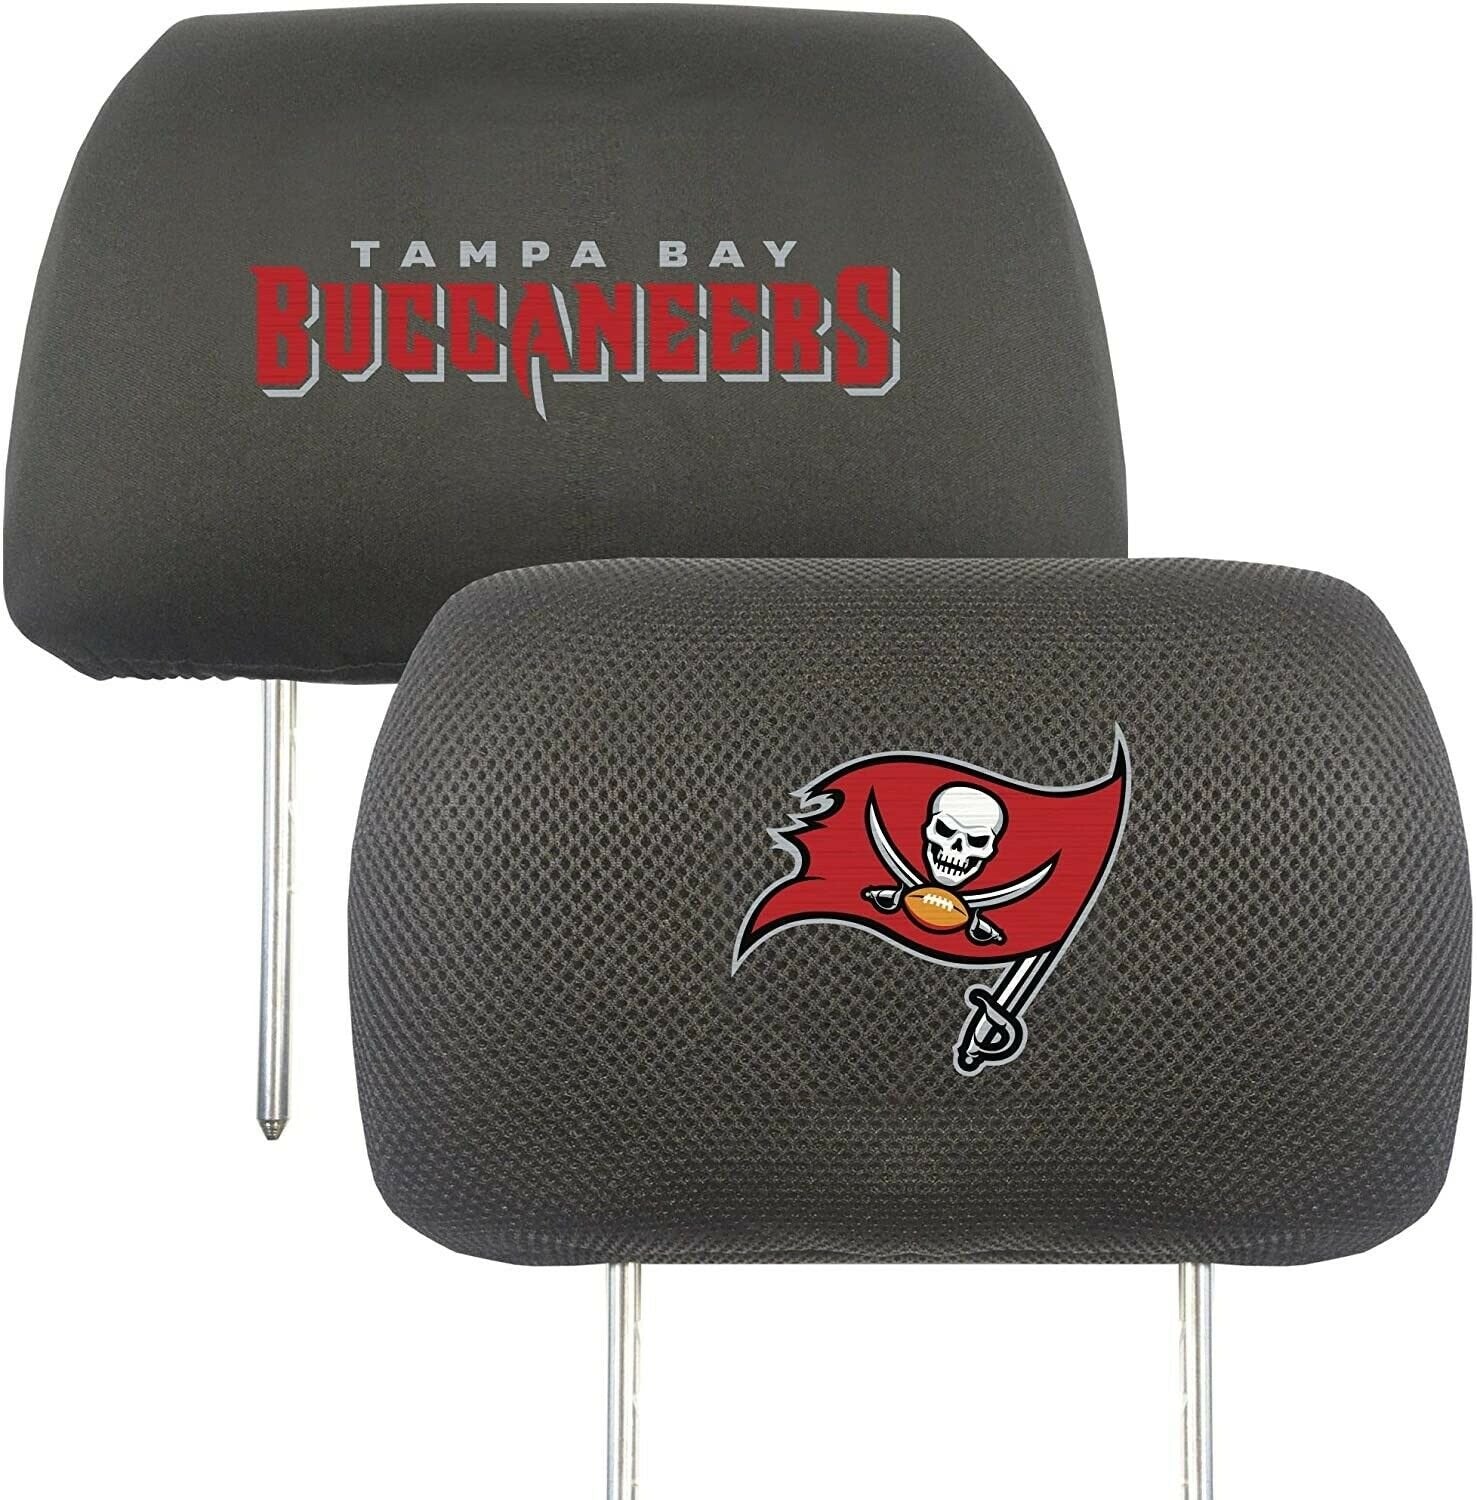 Tampa Bay Buccaneers Pair of Premium Auto Head Rest Covers, Embroidered, Black Elastic, 14x10 Inch